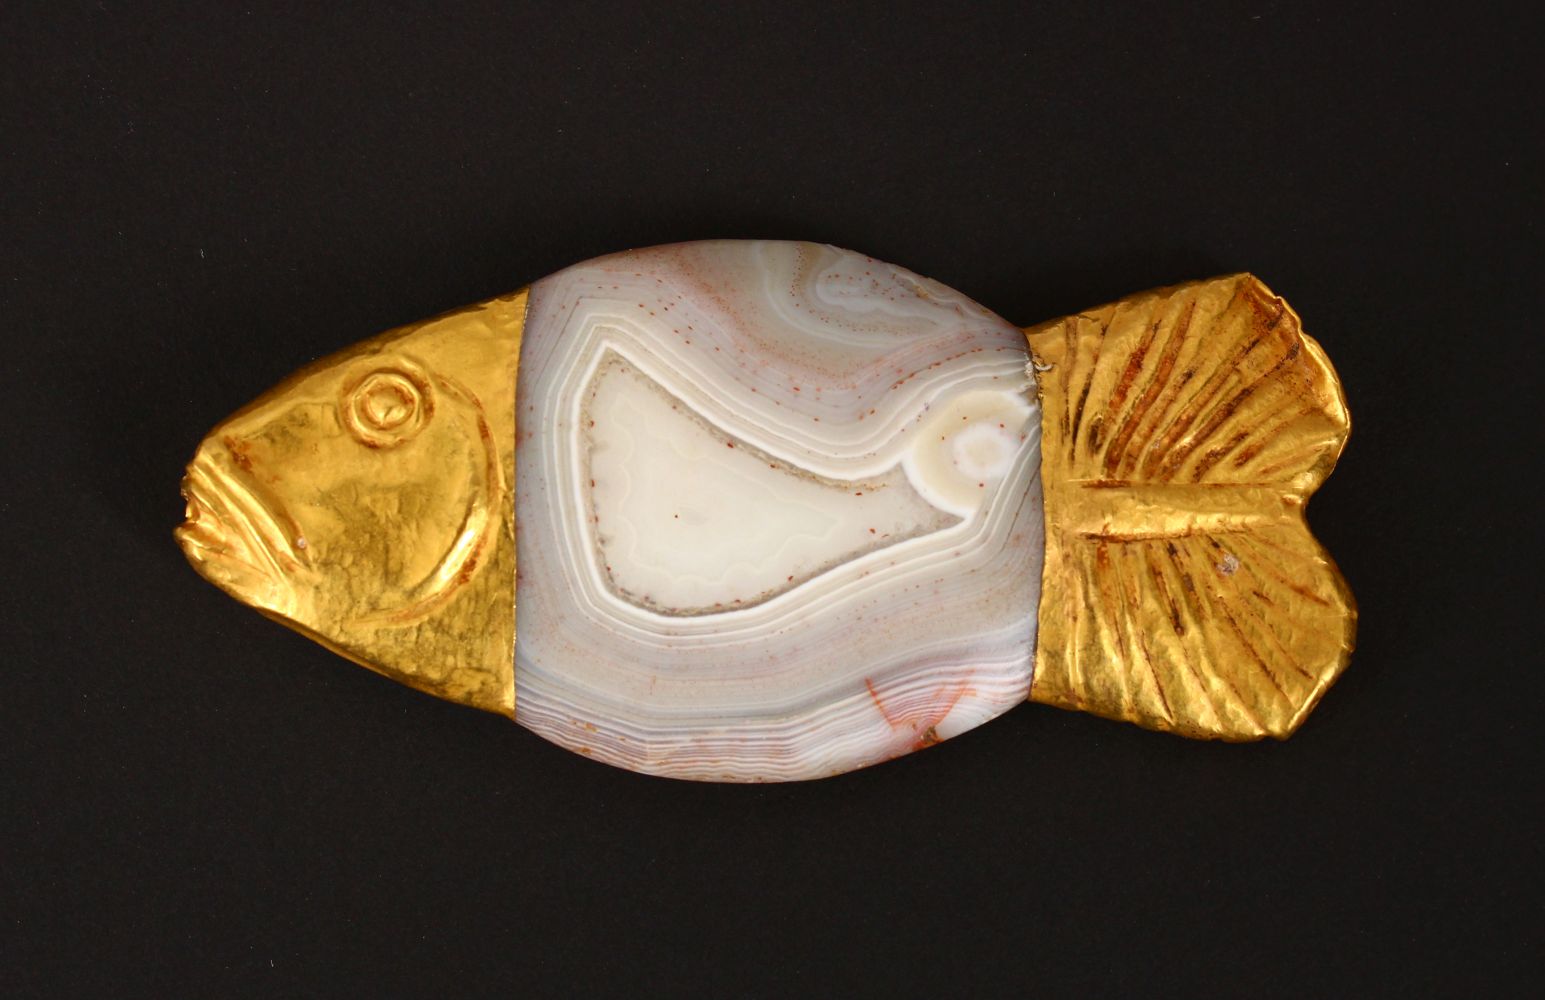 A GOOD EARLY BATAVIAN HIGH CARAT GOLD AND AGATE PENDANT IN THE FORM OF A FISH, 9cm x 4cm - Image 4 of 8